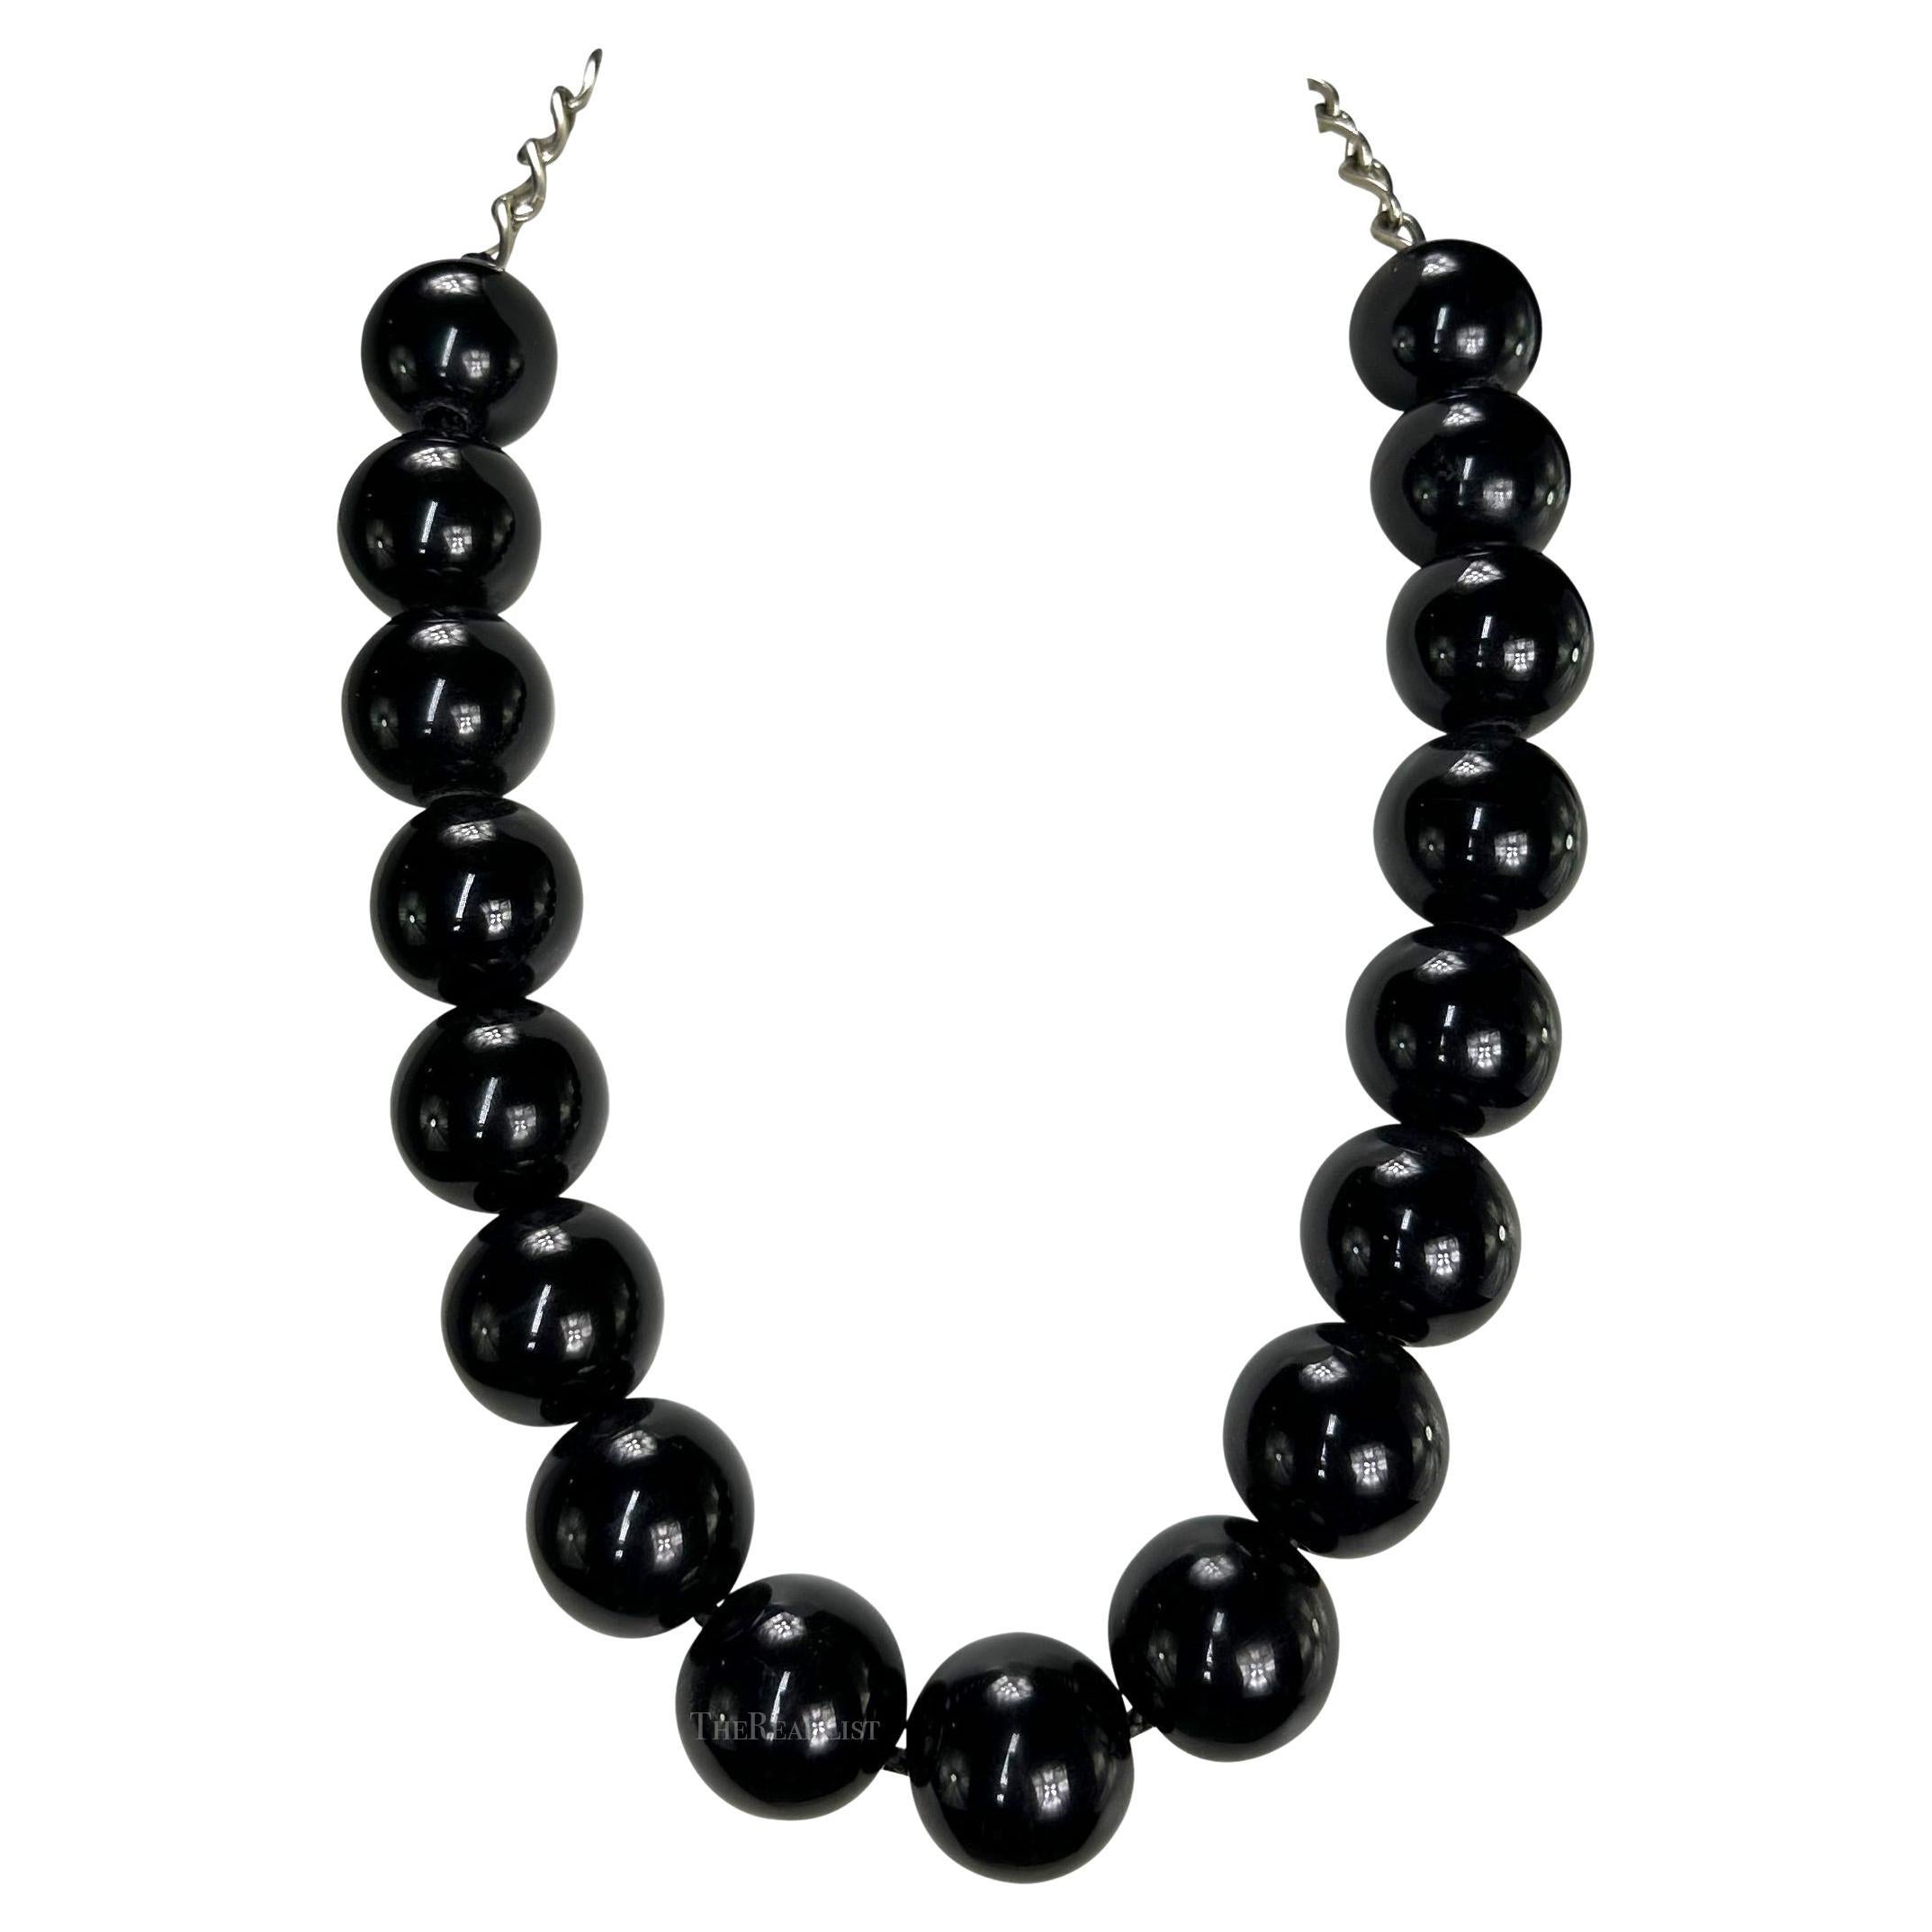 1980s Gianni Versace Oversized Black Lacquer Bead Chain Necklace